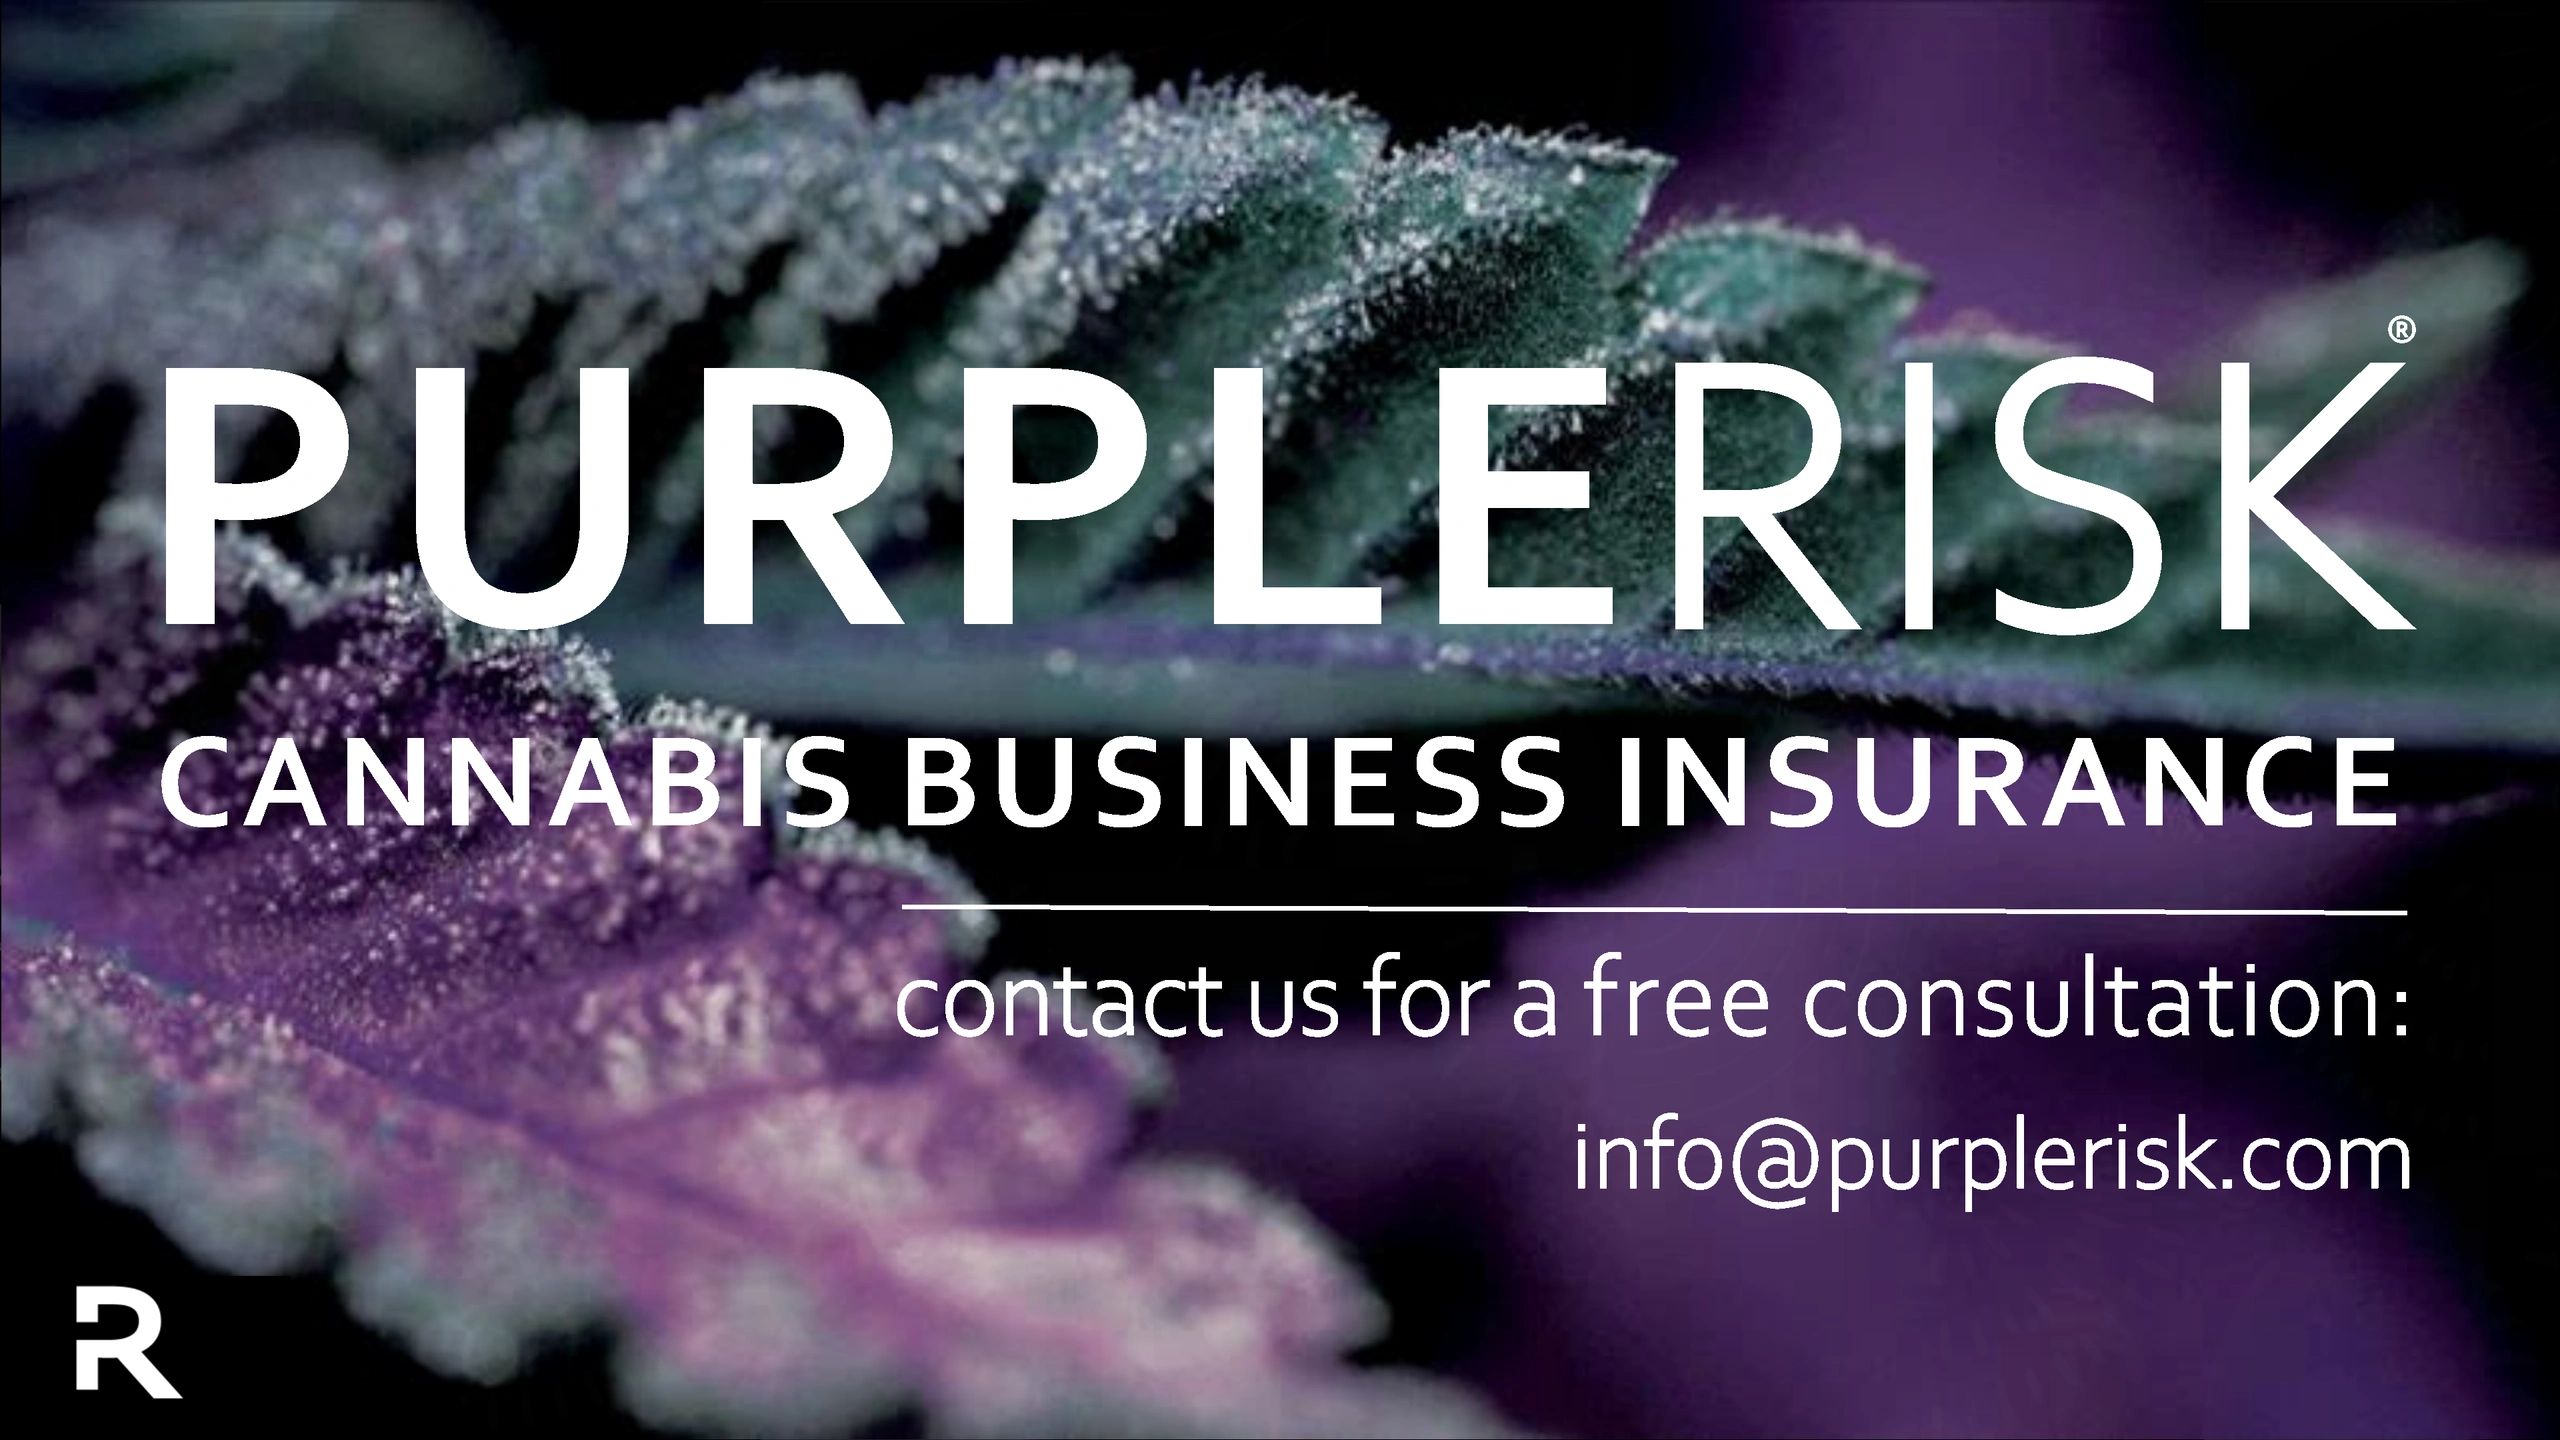 Purple Risk cannabis insurance agency are cannabis insurance brokers and specialists